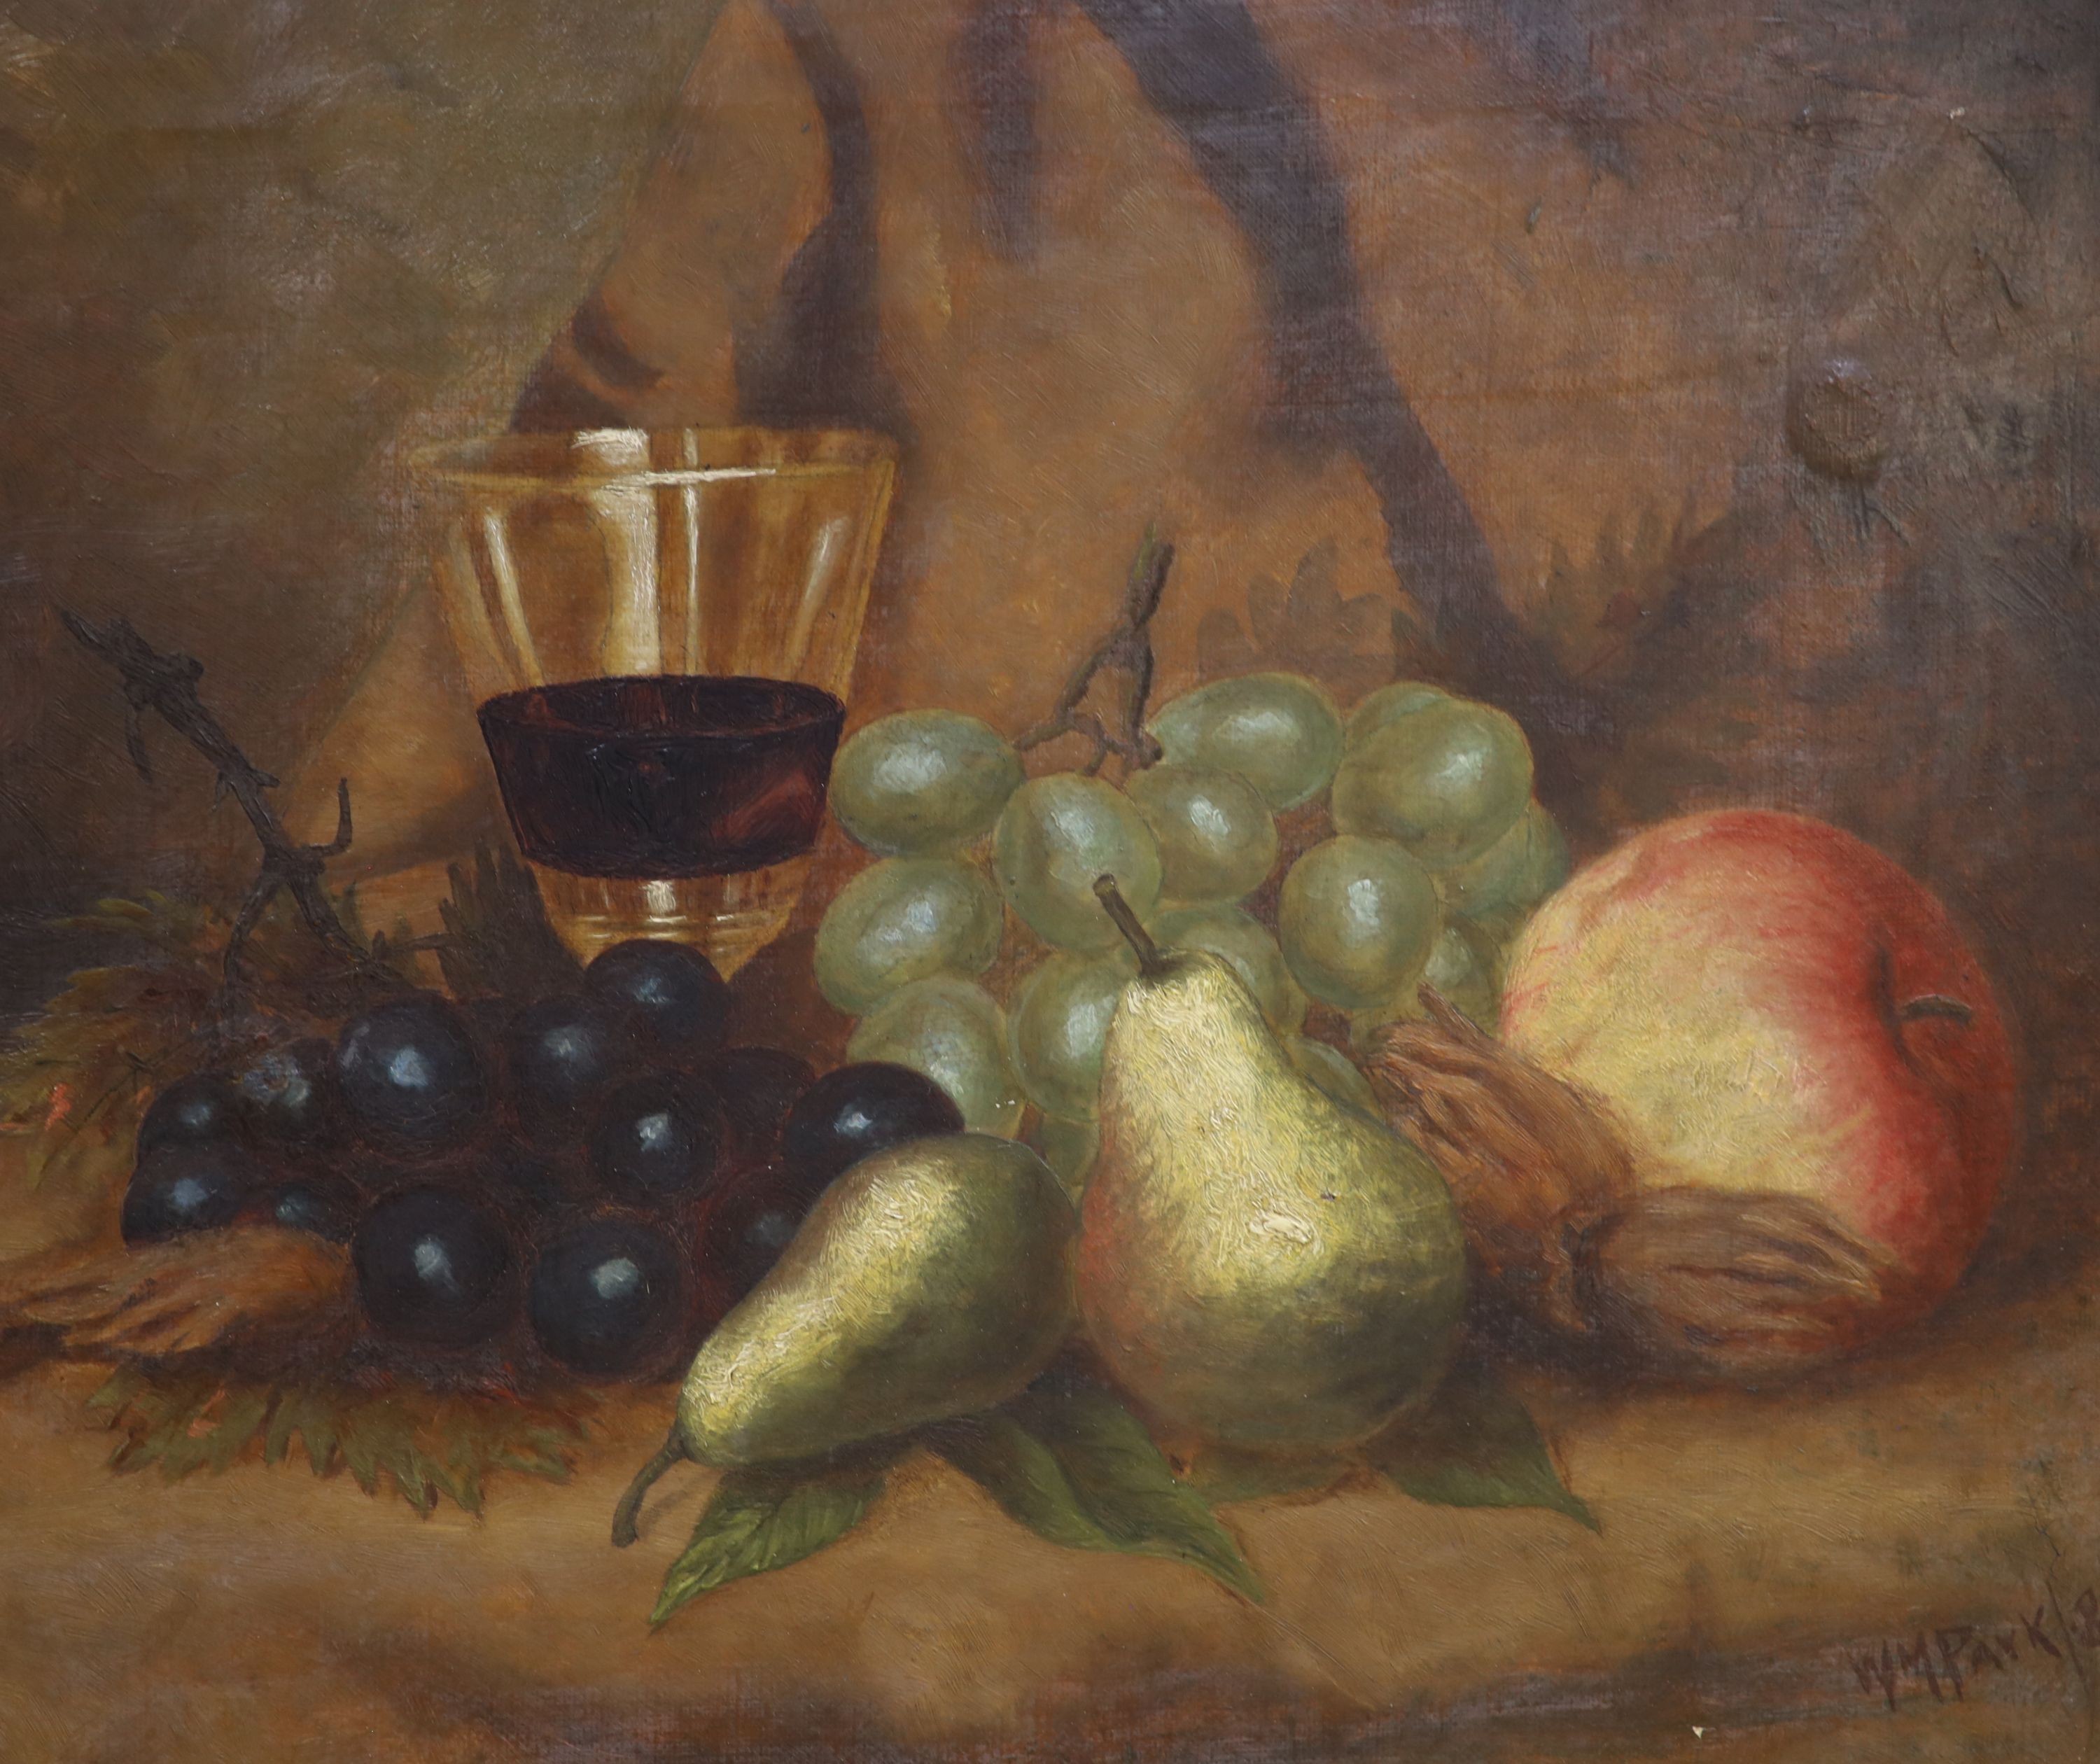 W M Park (19th C), Oil on canvas, still life of fruit and a glass of wine, signed and dated 85, 29 x 34 cm.